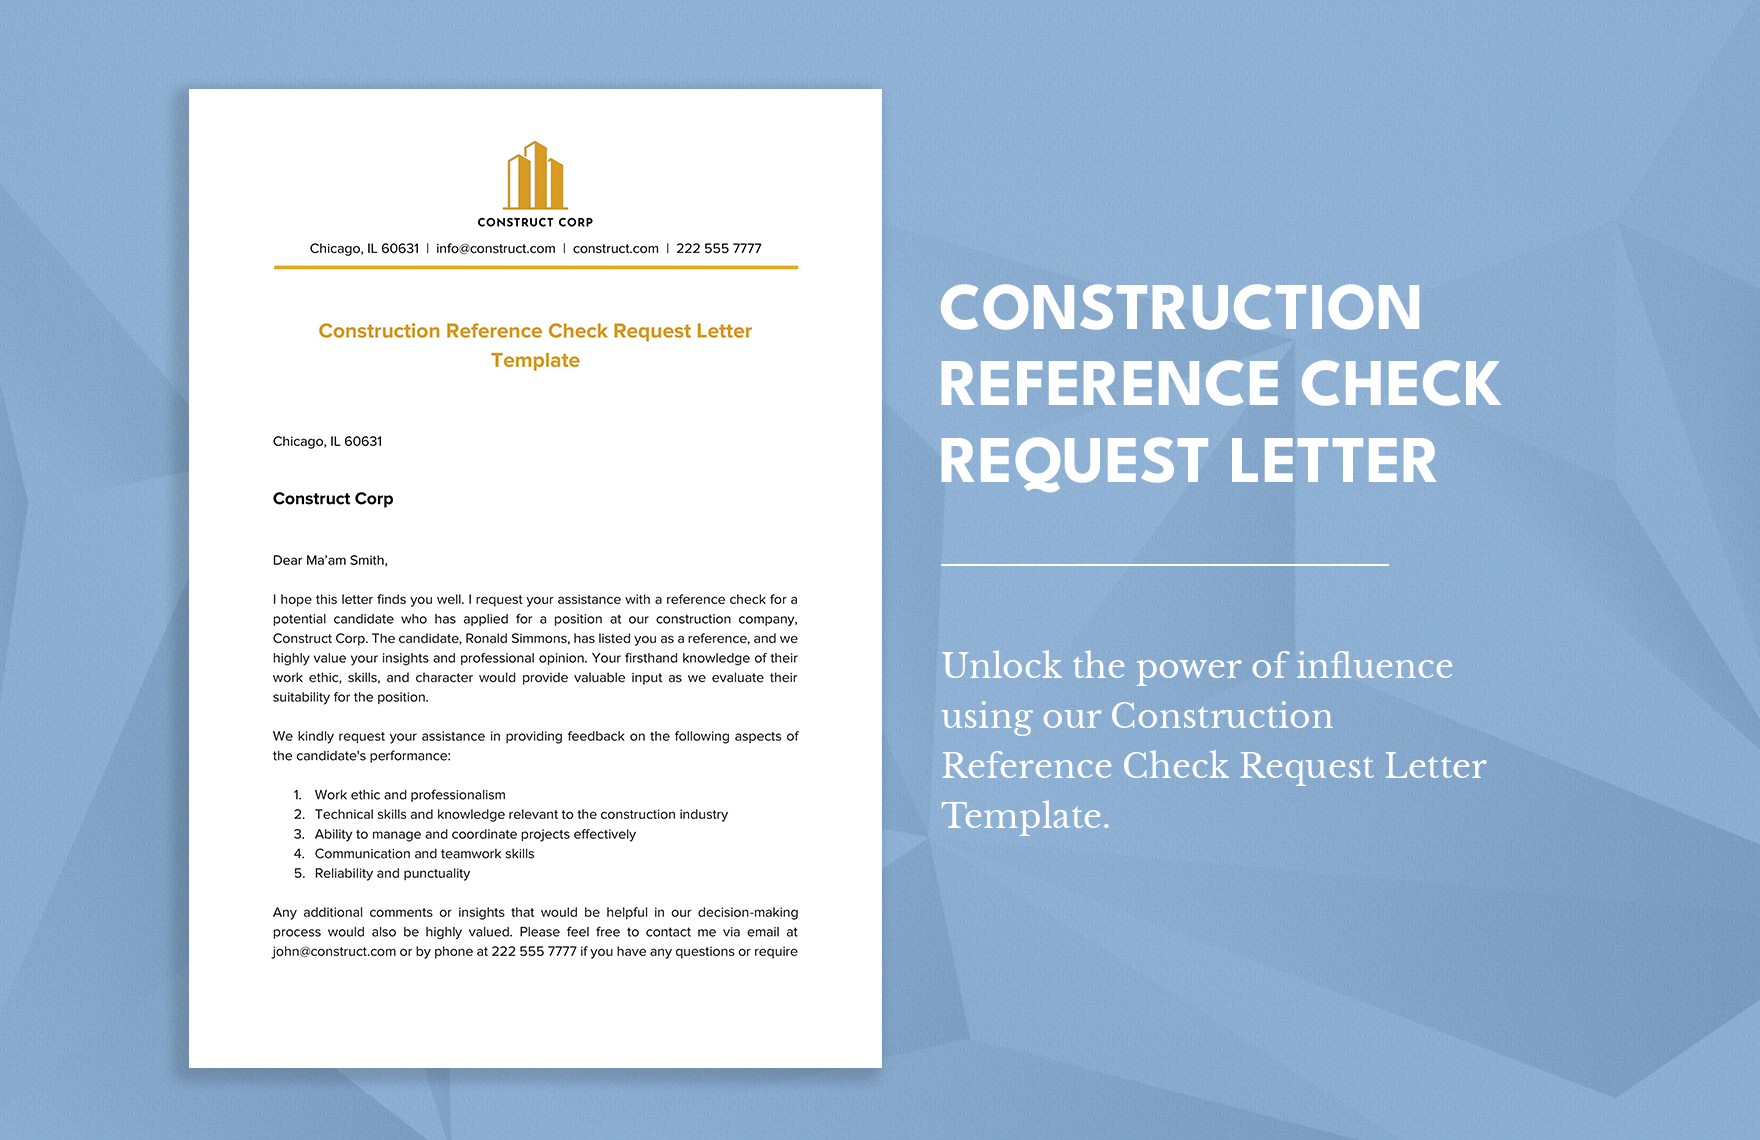 Construction Reference Check Request Letter